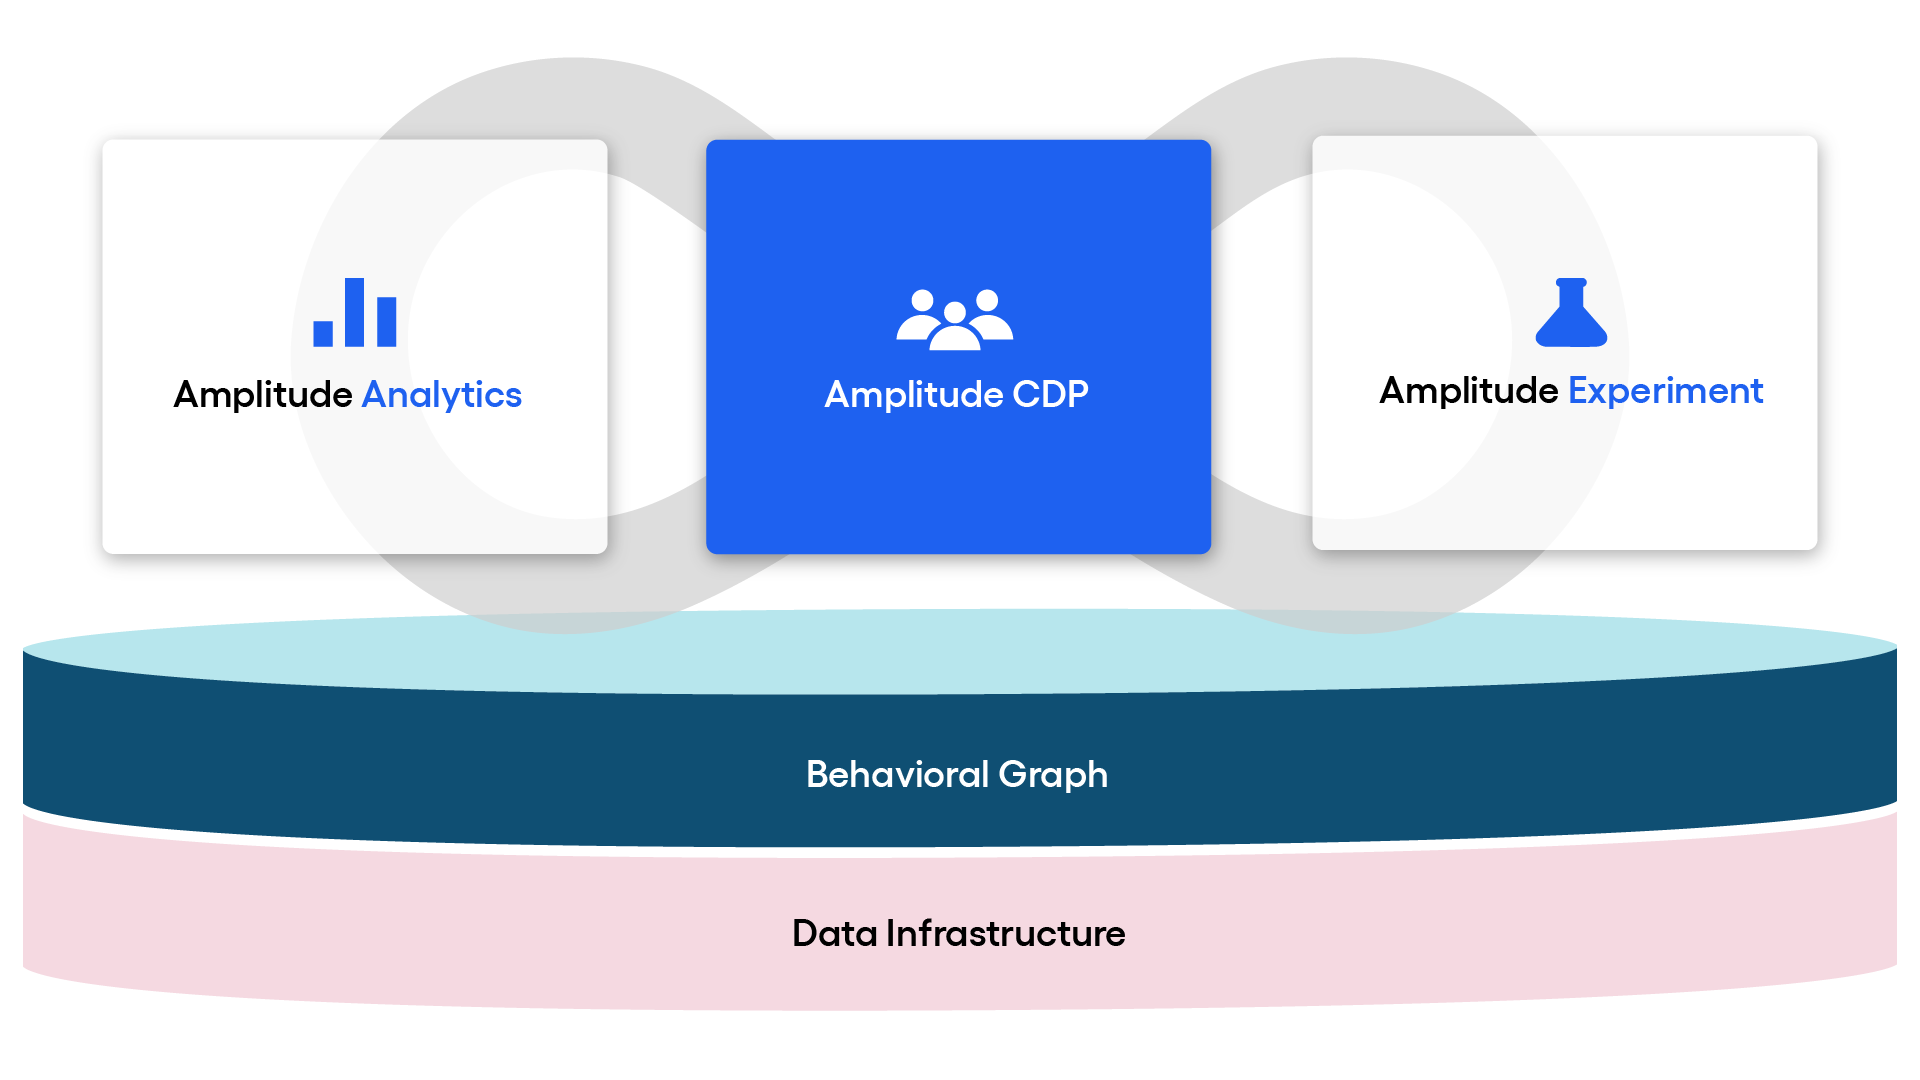 Amplitude analytics, CDP, Experiment, behavioral Graph and Data Infrastructure 